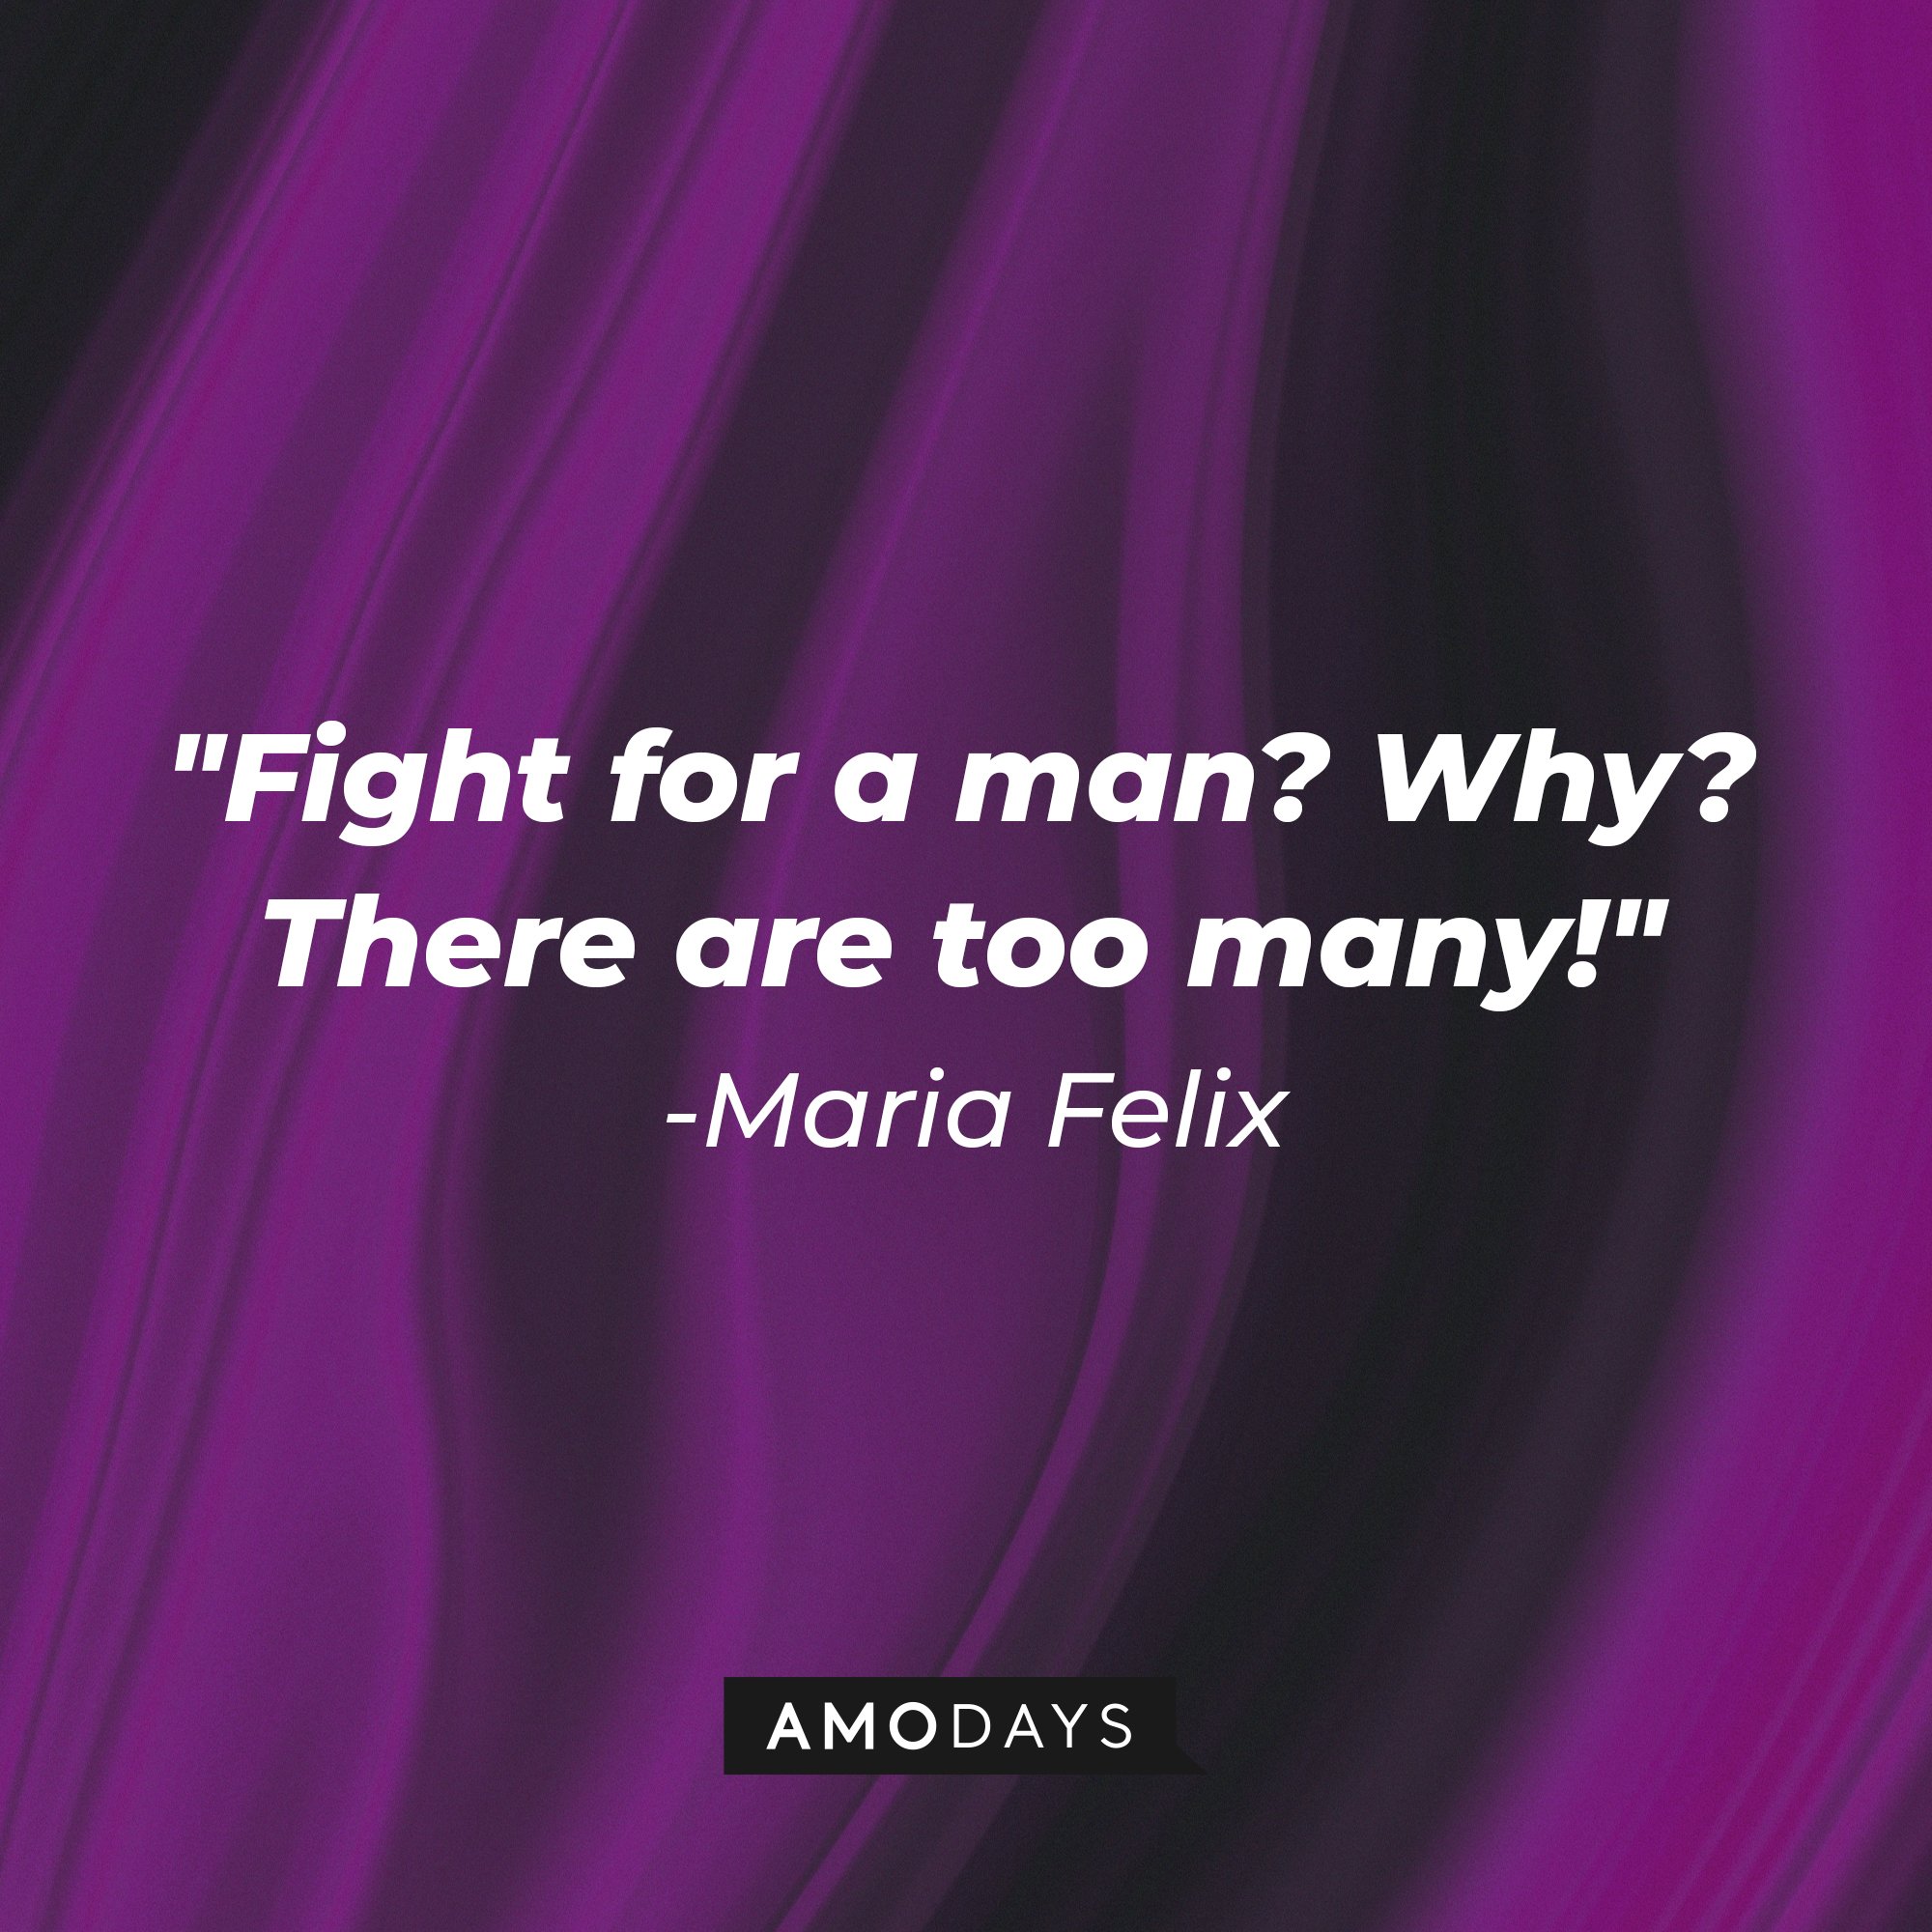 Maria Felix's quote: "Fight for a man? Why? There are too many!" | Image: AmoDays